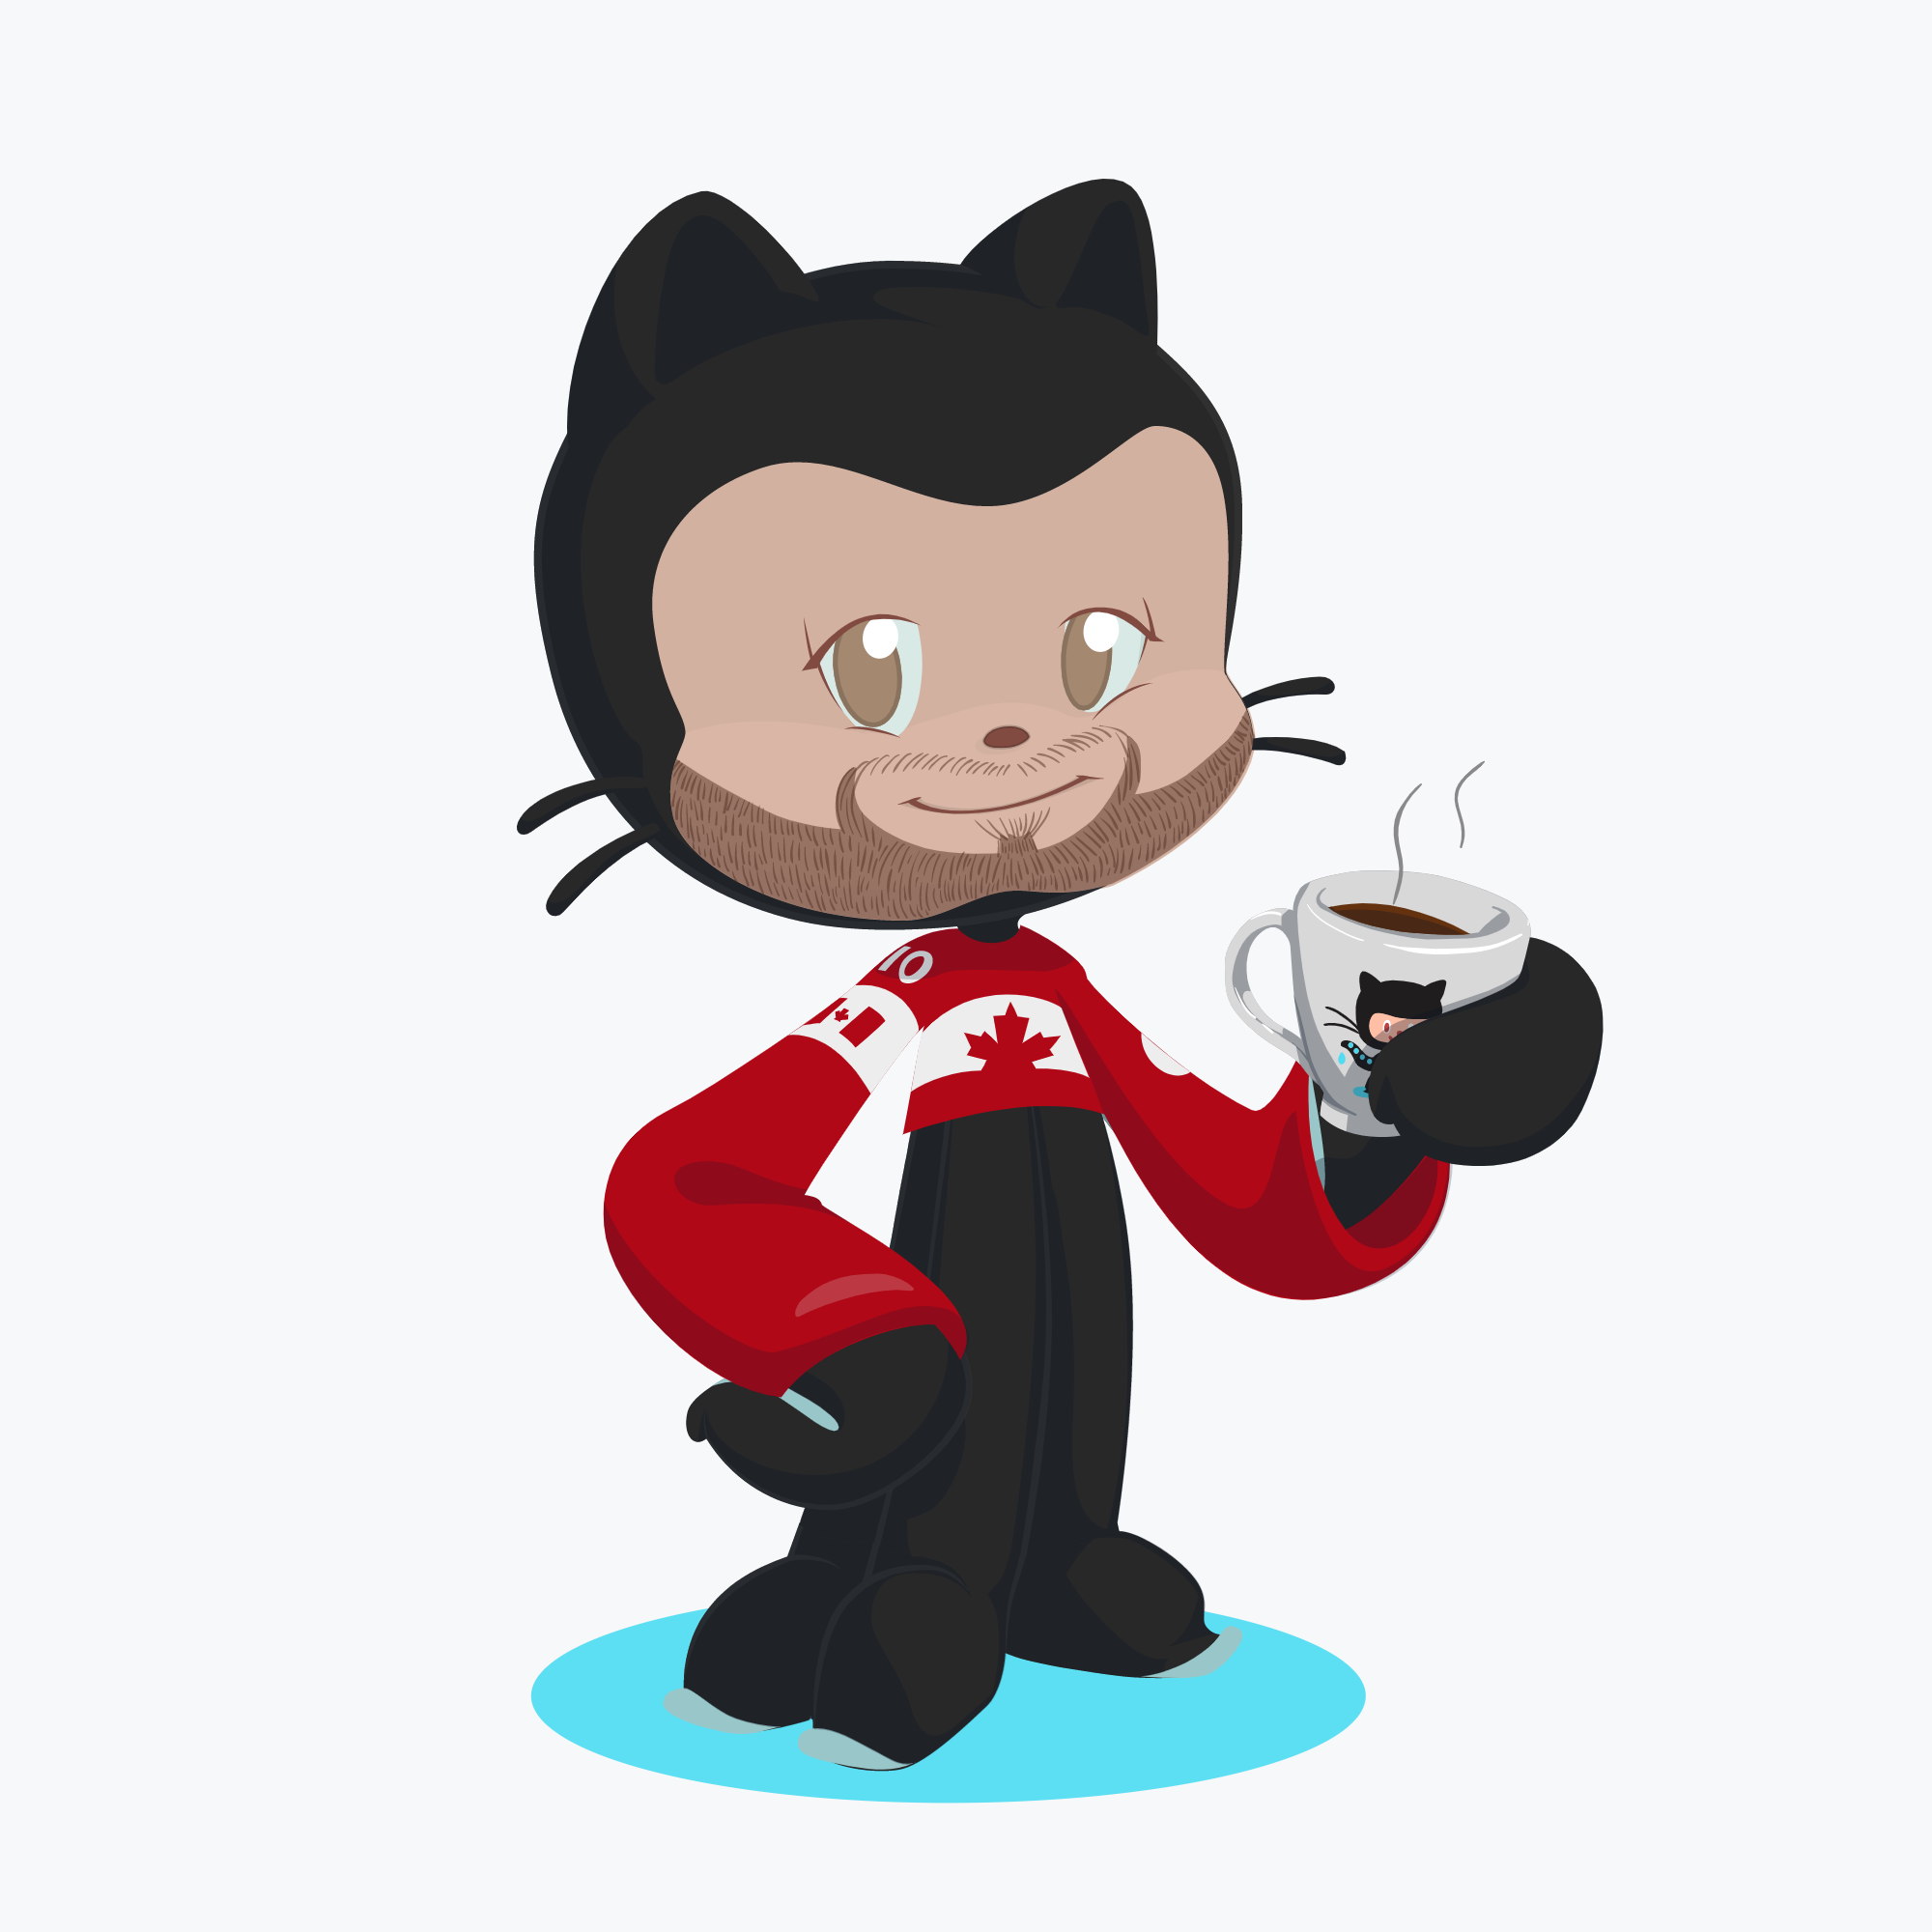 An octocat with a beard, Canadian sports jersey, and coffee mug